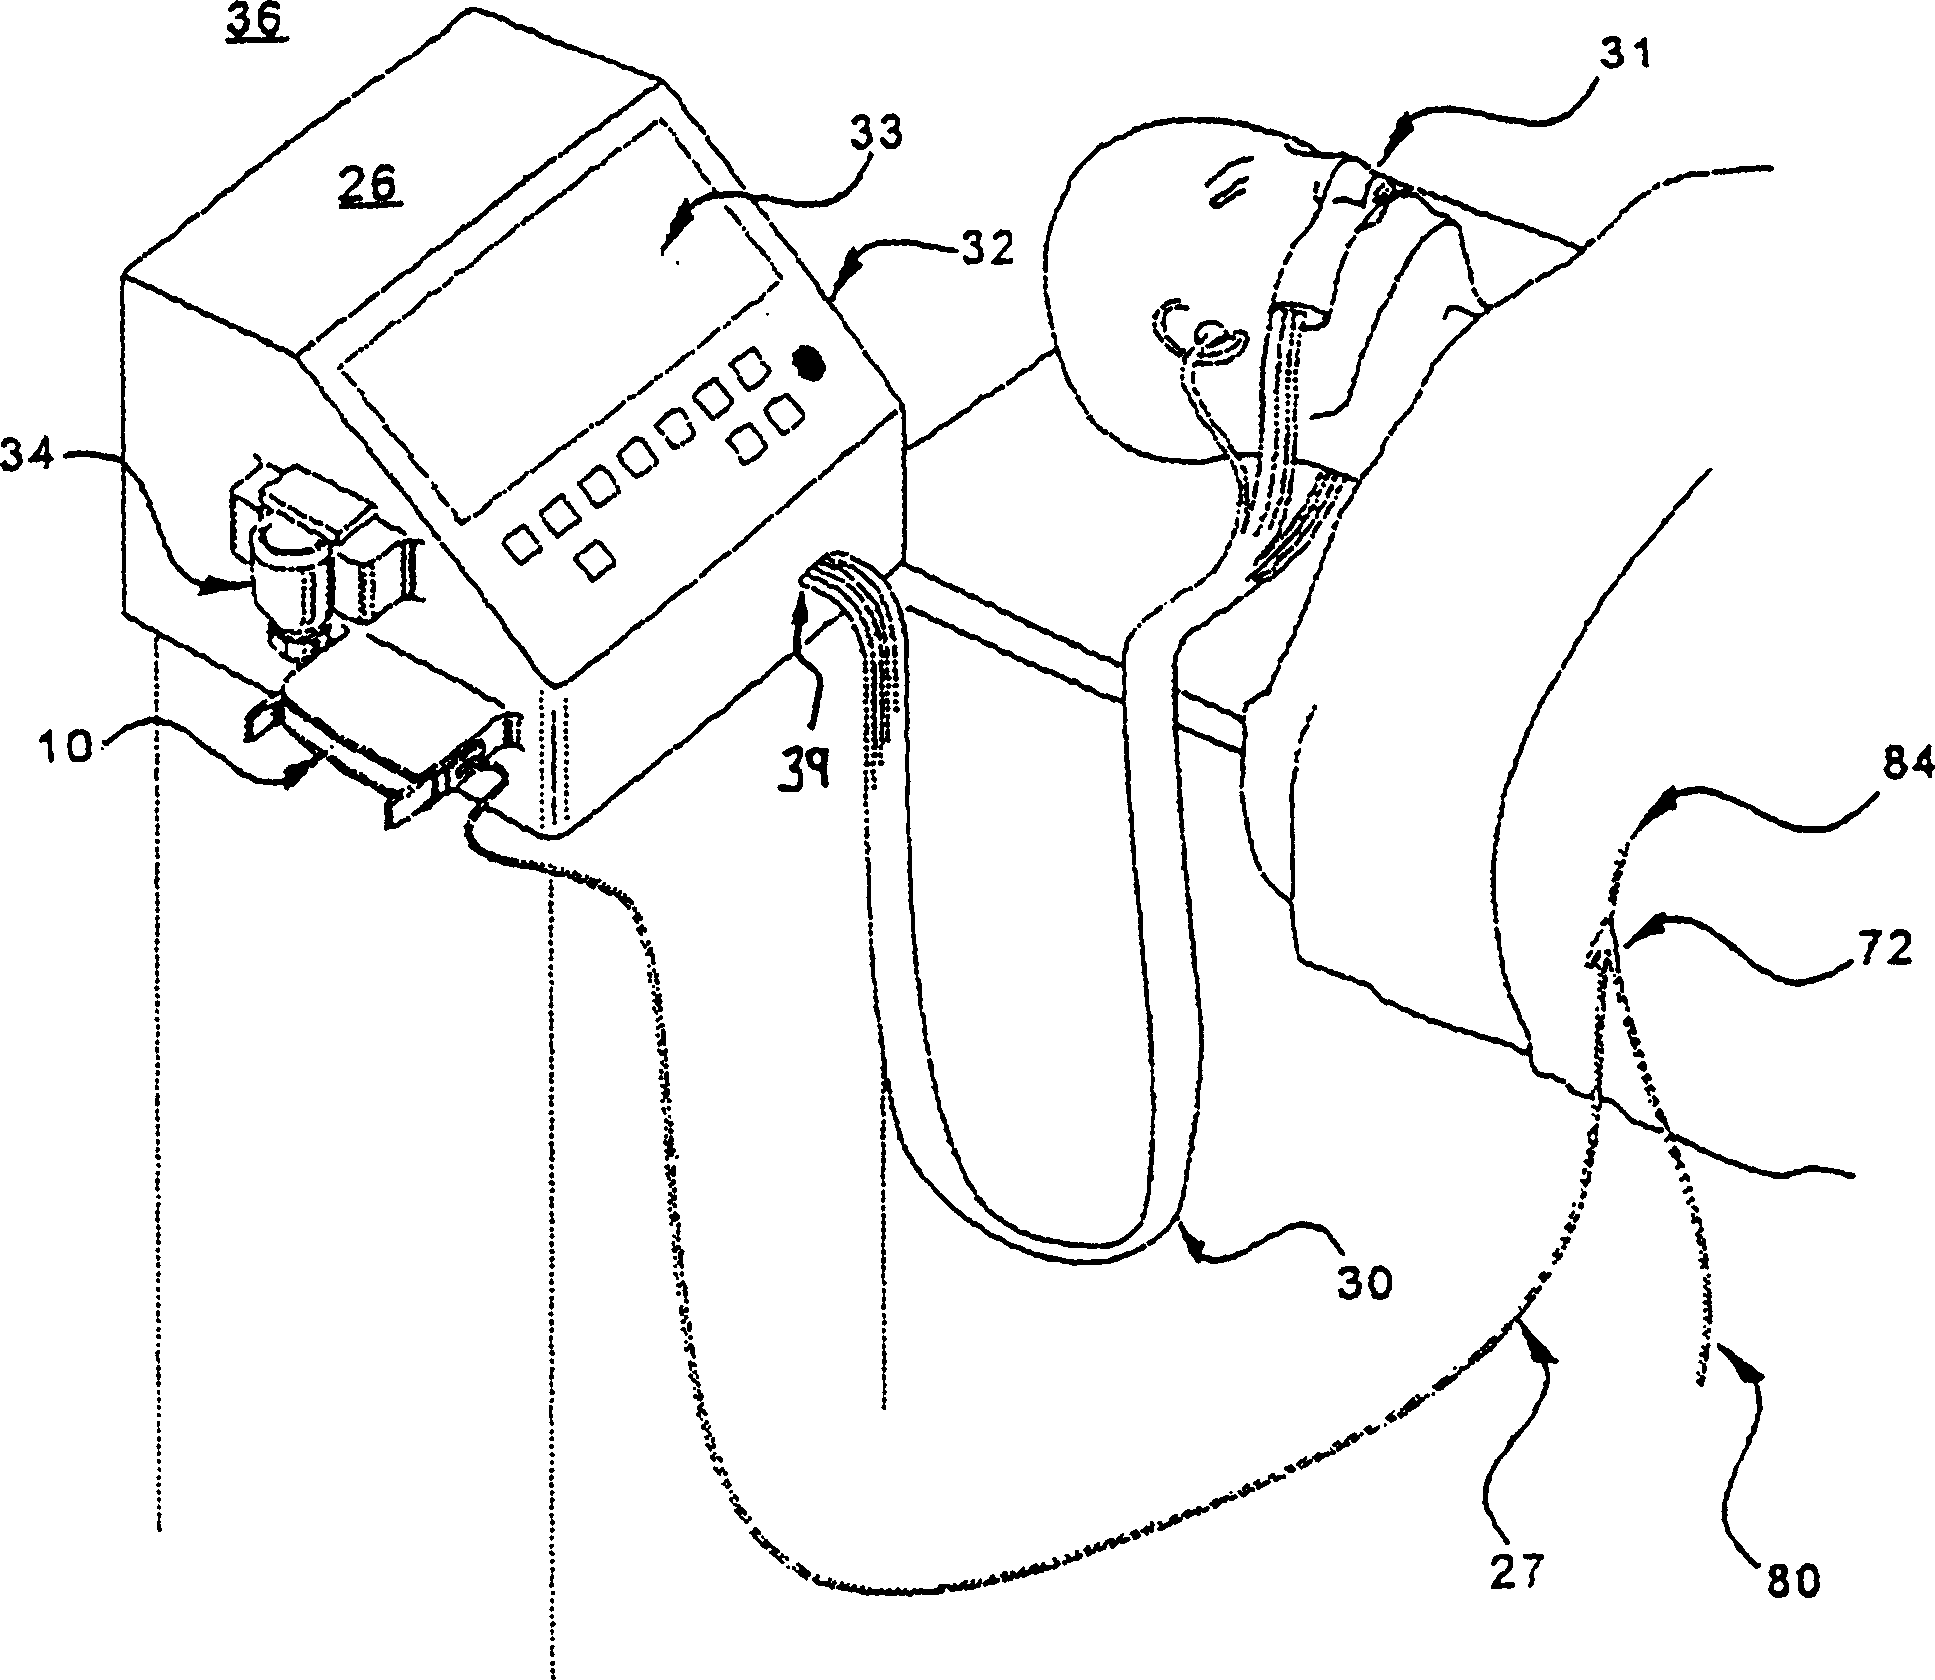 Apparatuses and methods for providing IV infusion administration